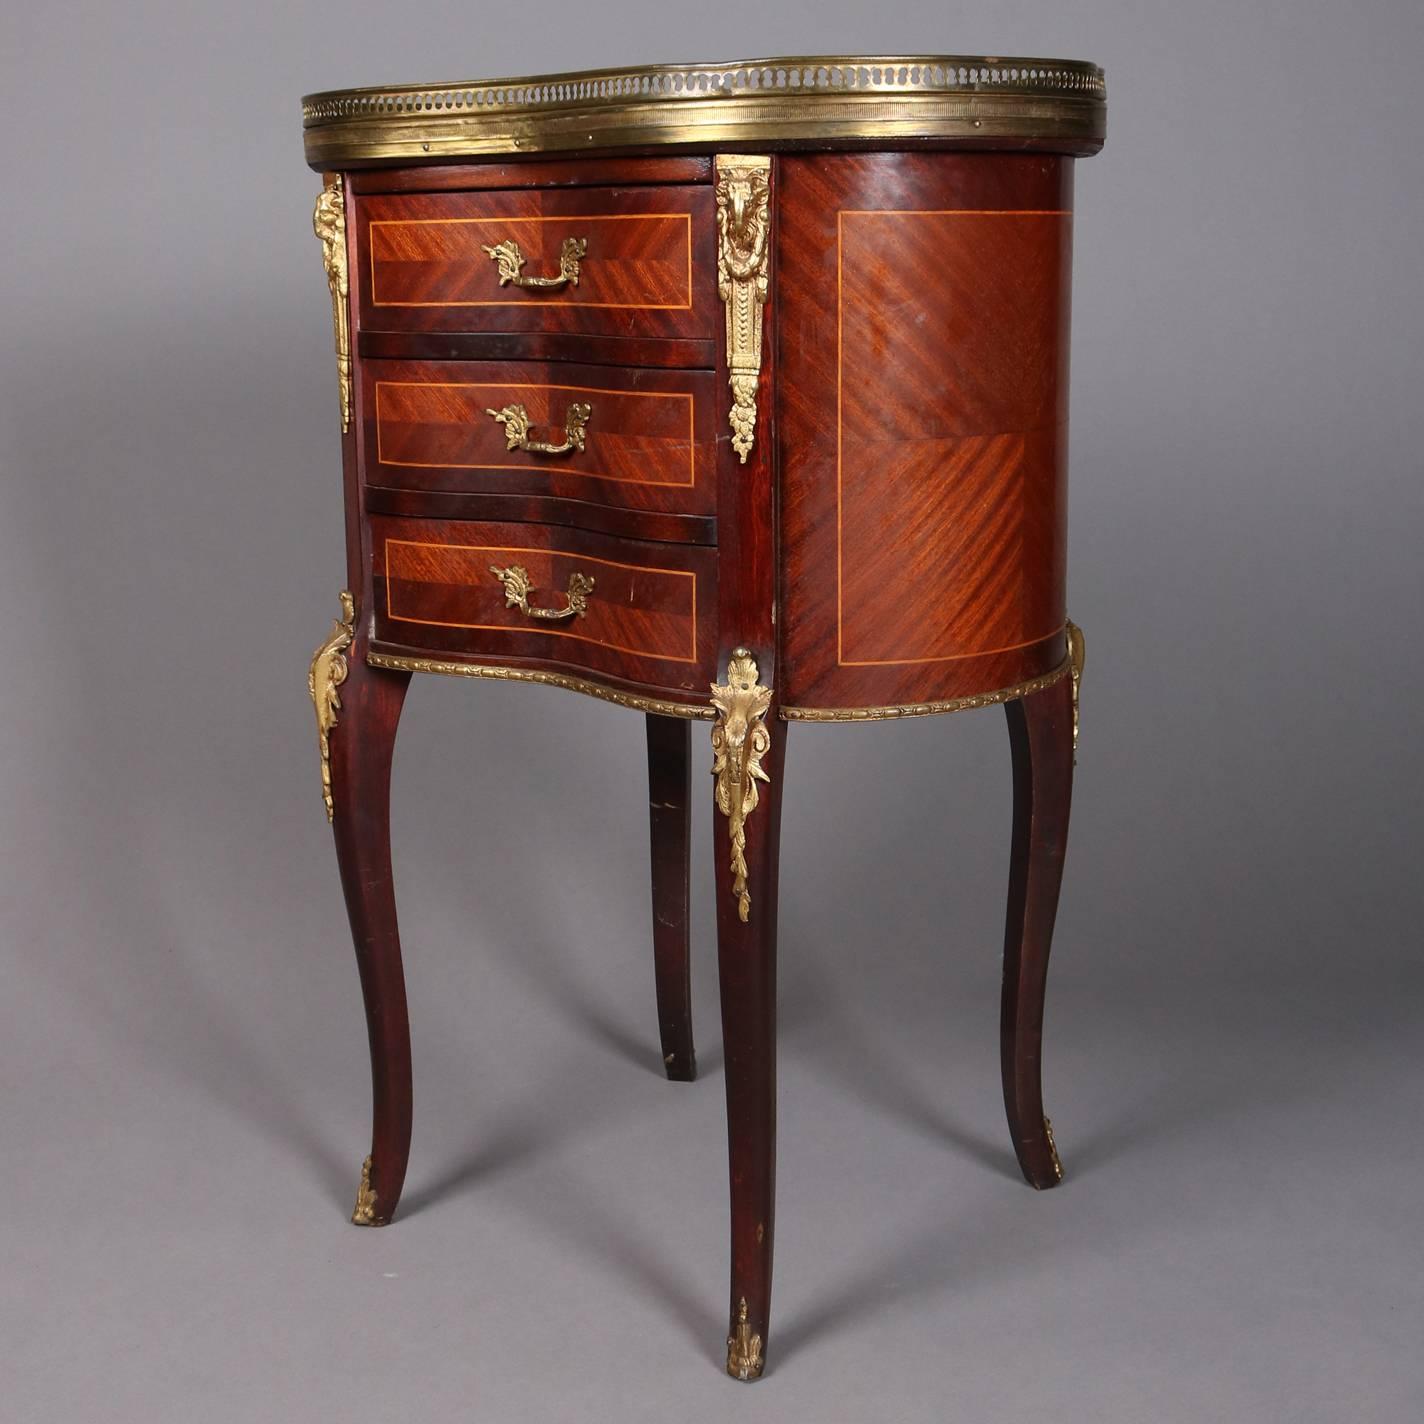 Antique French Louis XV mahogany and rosewood stand features kidney form, three drawers with bookmatched and inlaid panels and satinwood banding, ormolu accoutrements and pierced gallery, seated on cabriole legs, 19th century

Measures: 29